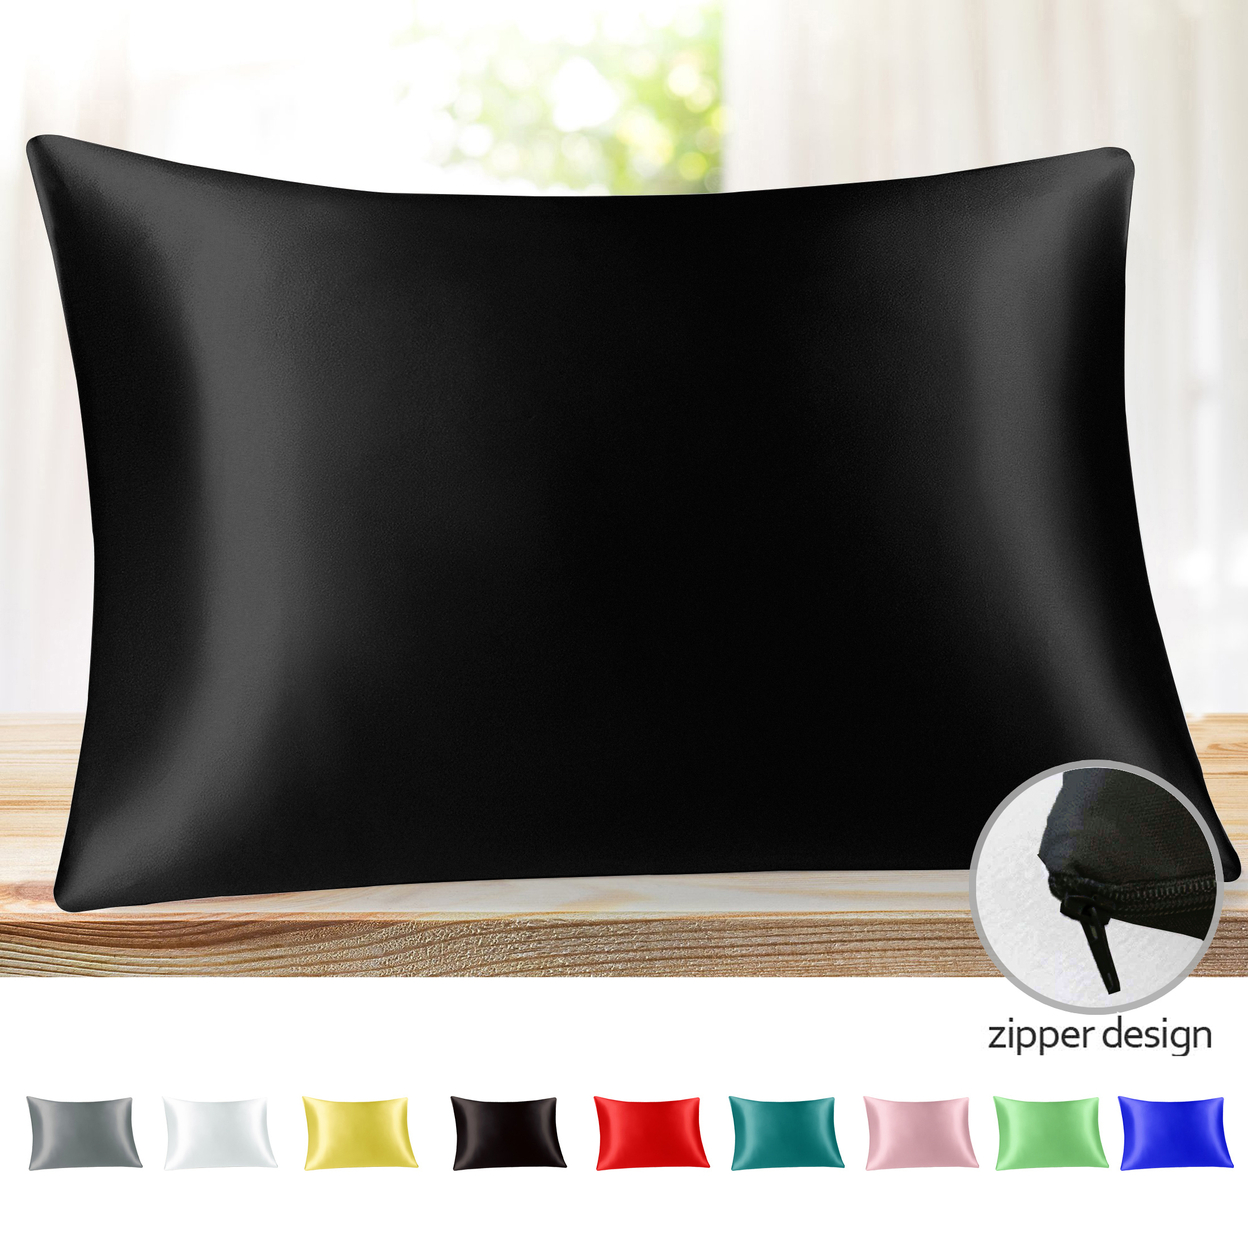 Ultra Soft Smooth Natural Cooling Luxurious Zippered Queen Satin Pillow Cover Protectors 20x30 - Black